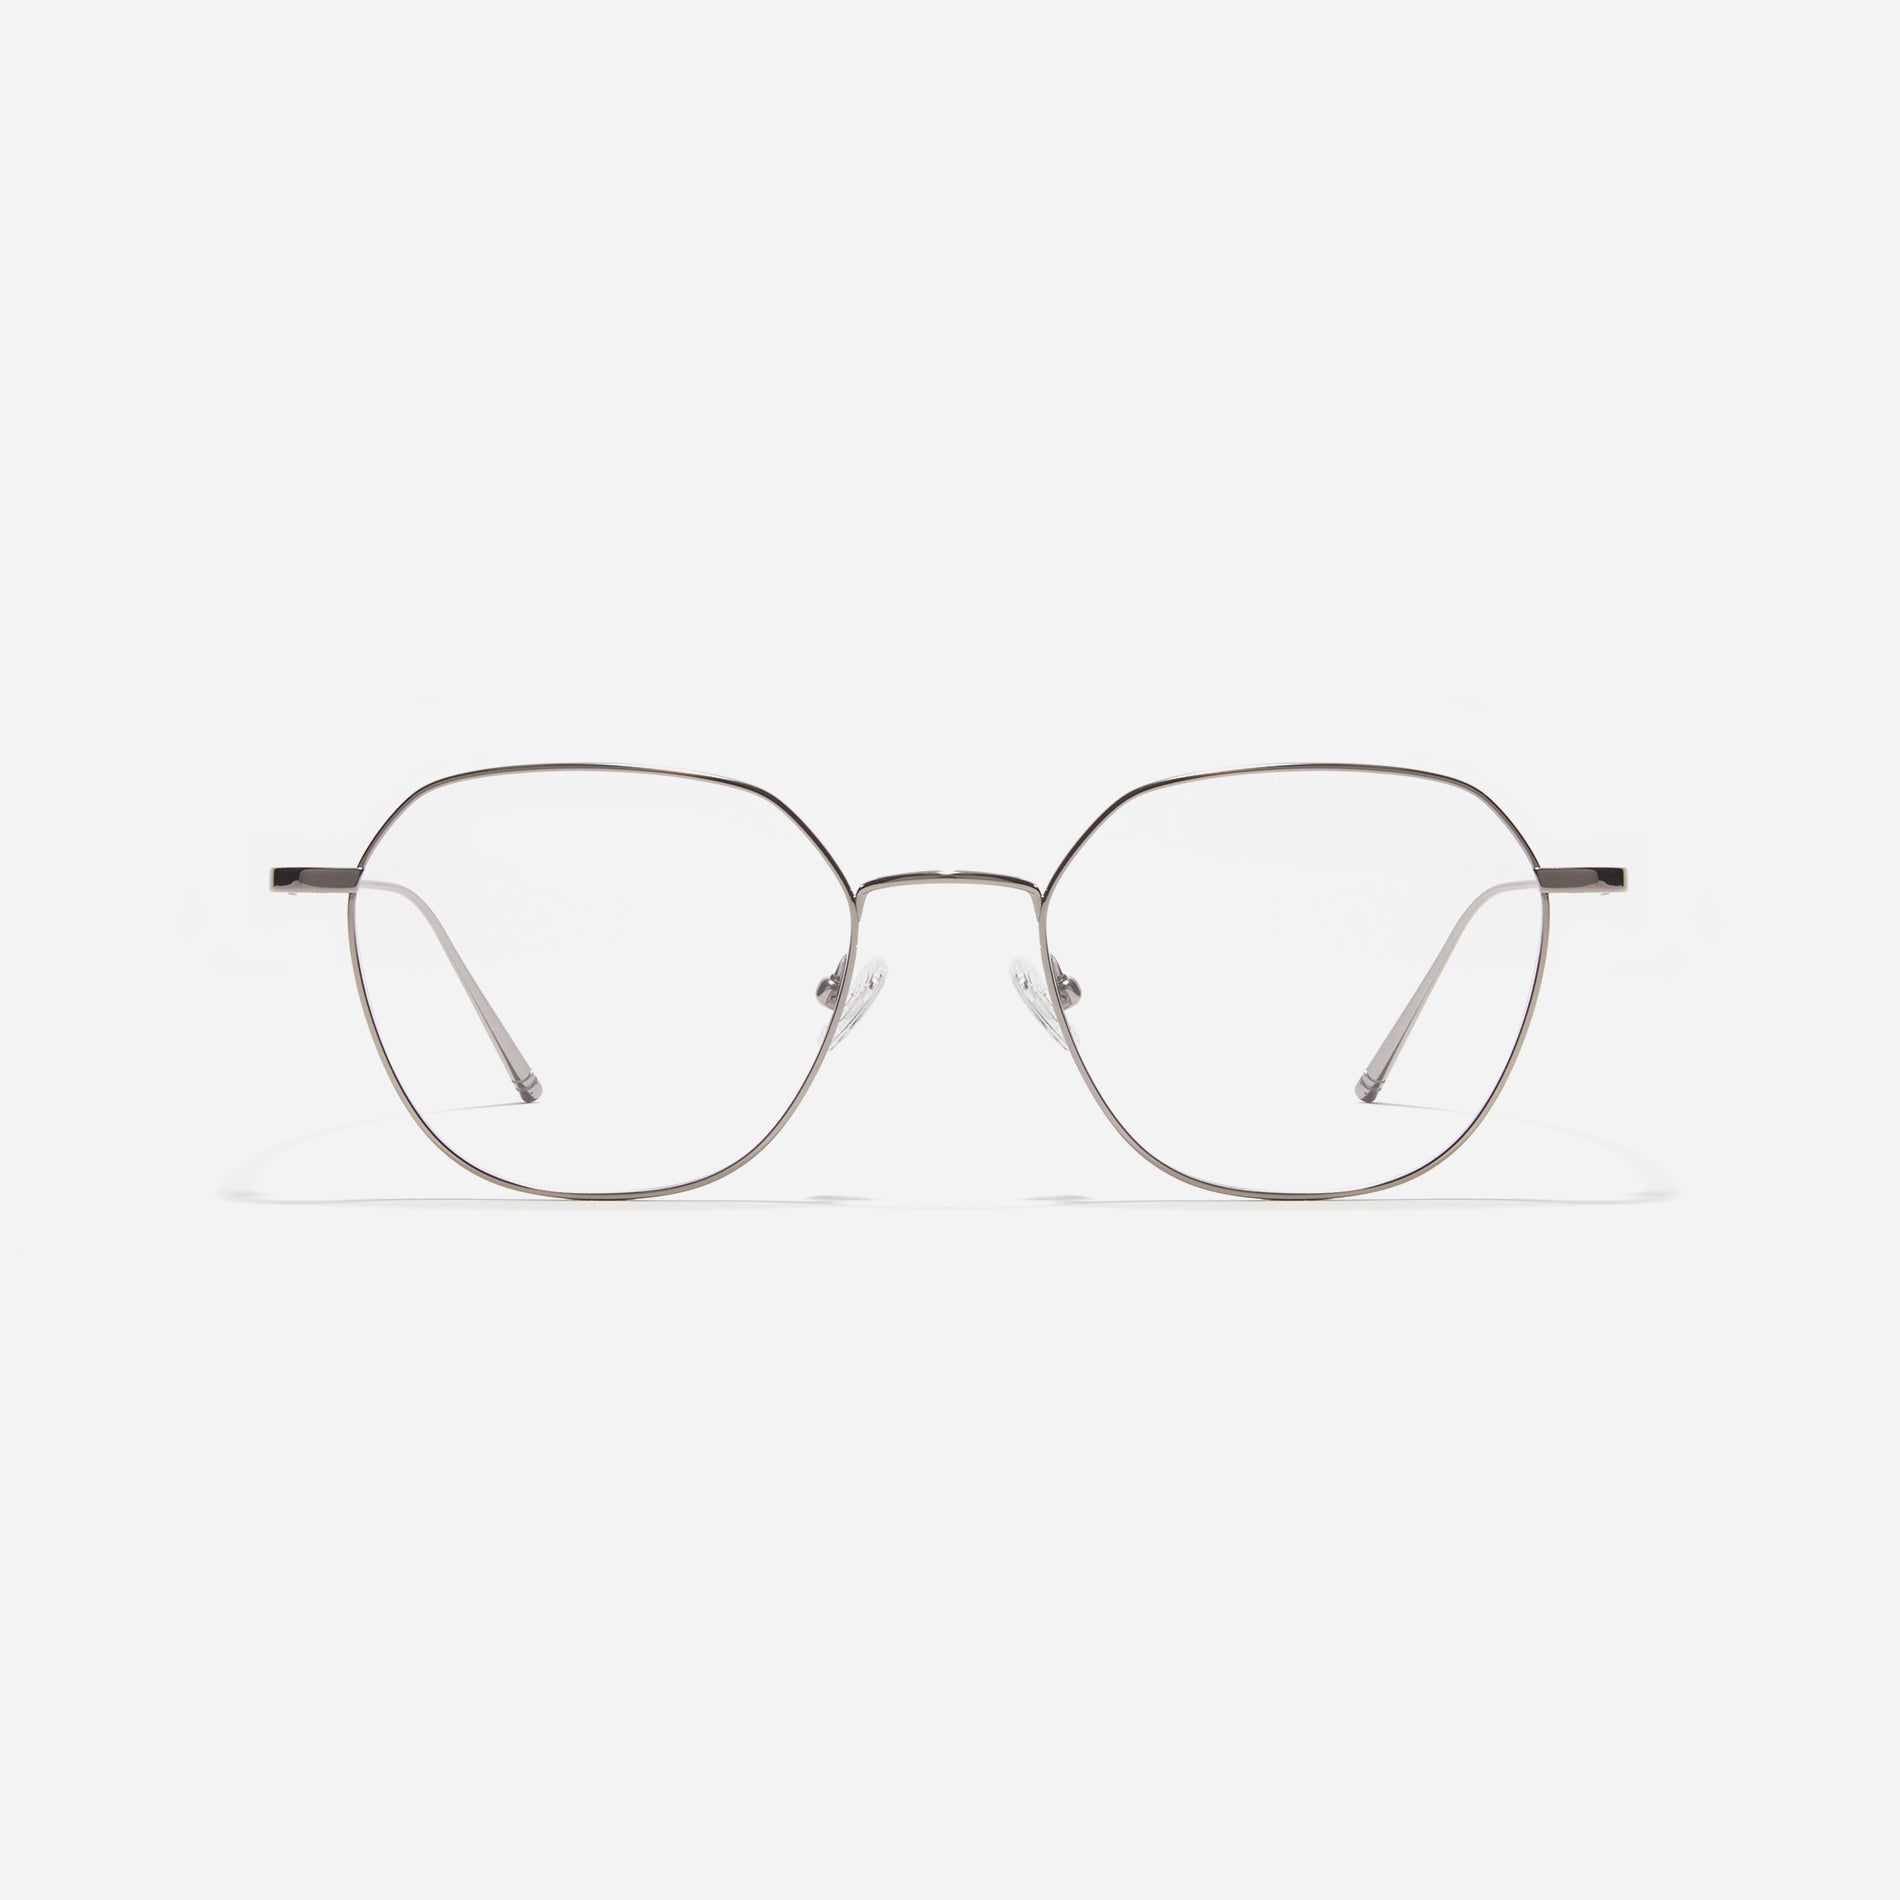 Norman glasses feature a polygonal shape with oversized rims. Crafted entirely from titanium, they are lightweight and comfortable to wear. Available in four different colors, these glasses offer fashionable styles suitable for both men and women.